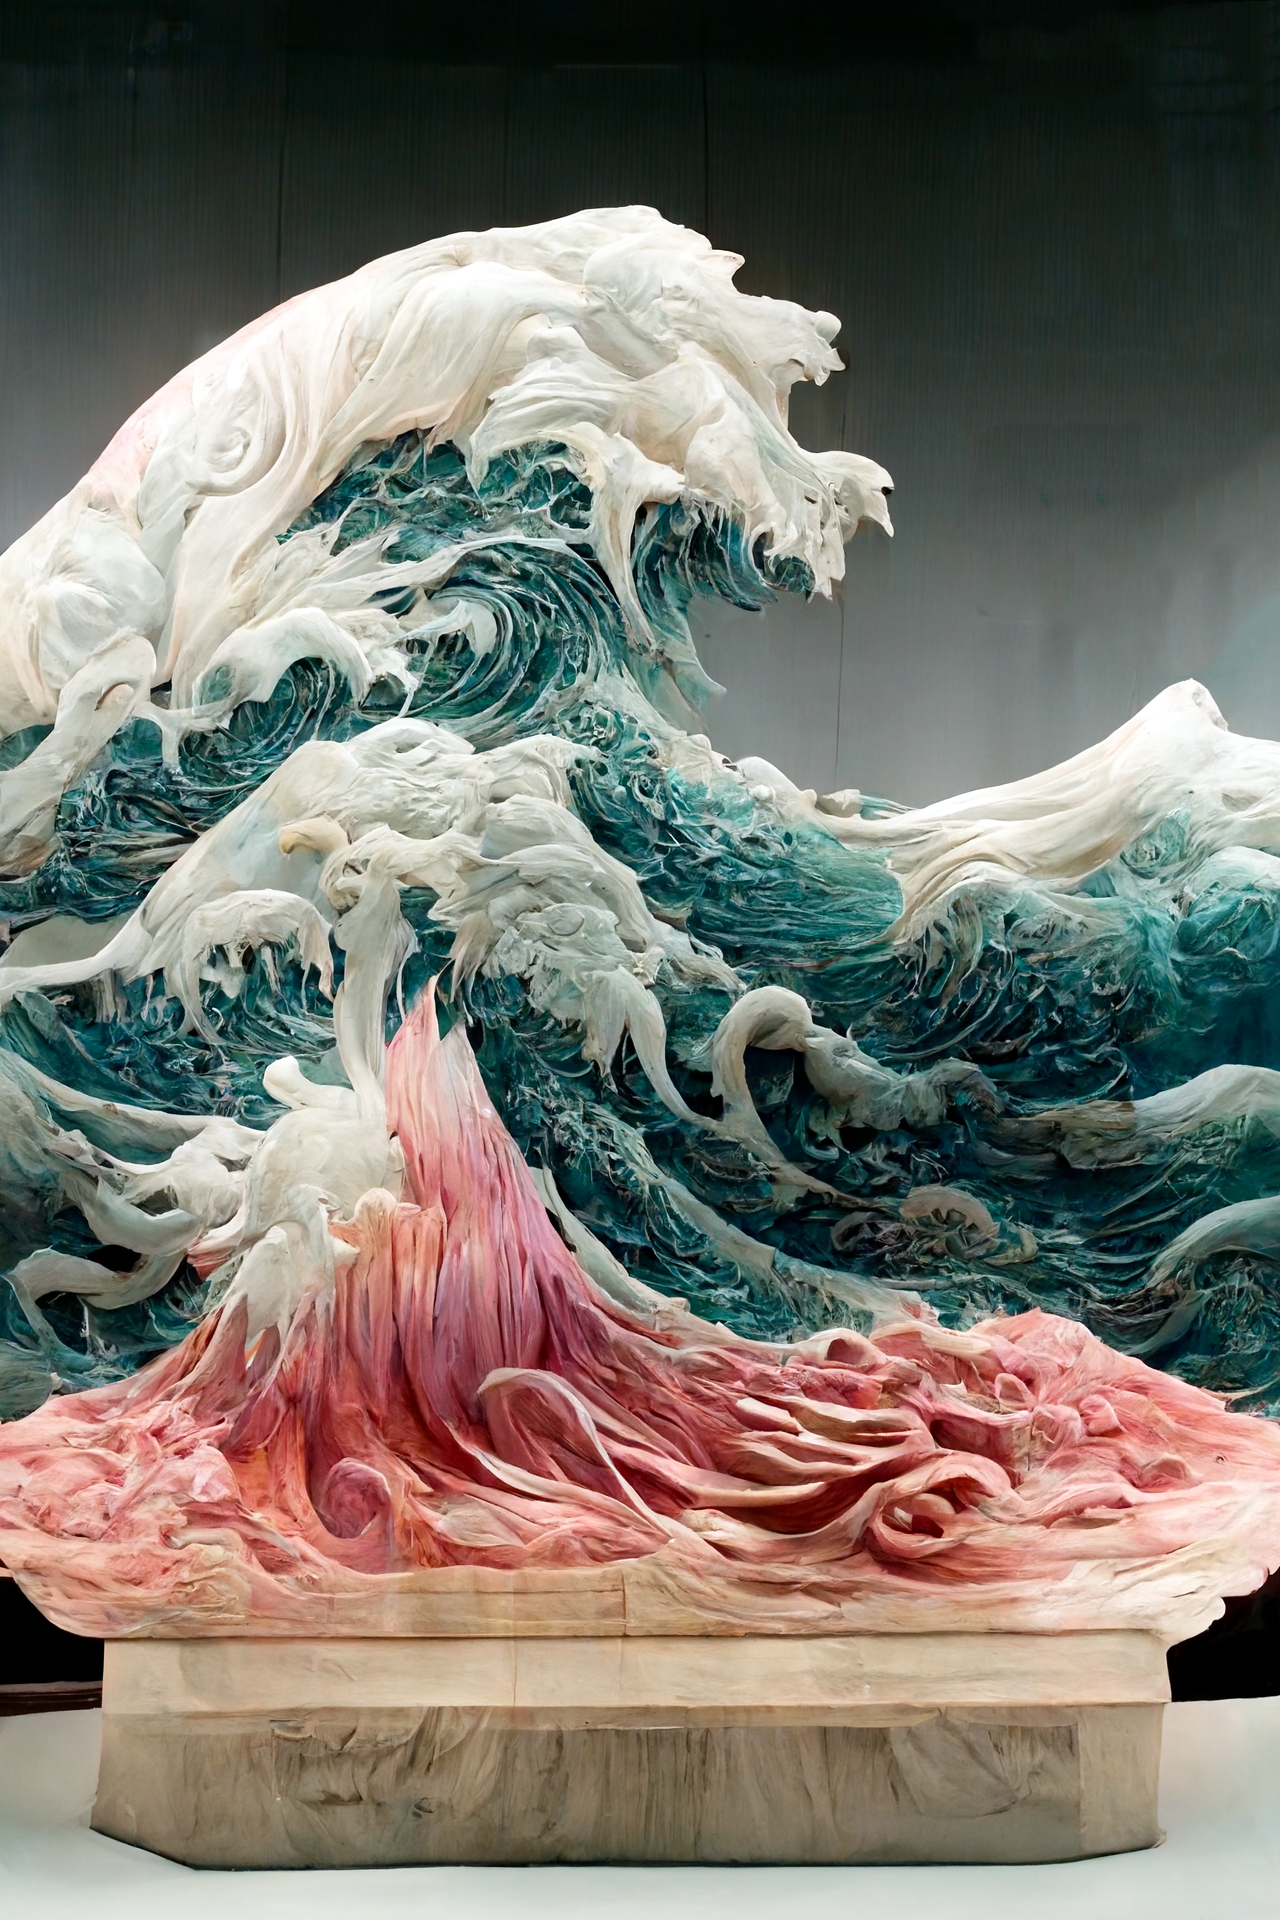 Diorama of The Great Wave